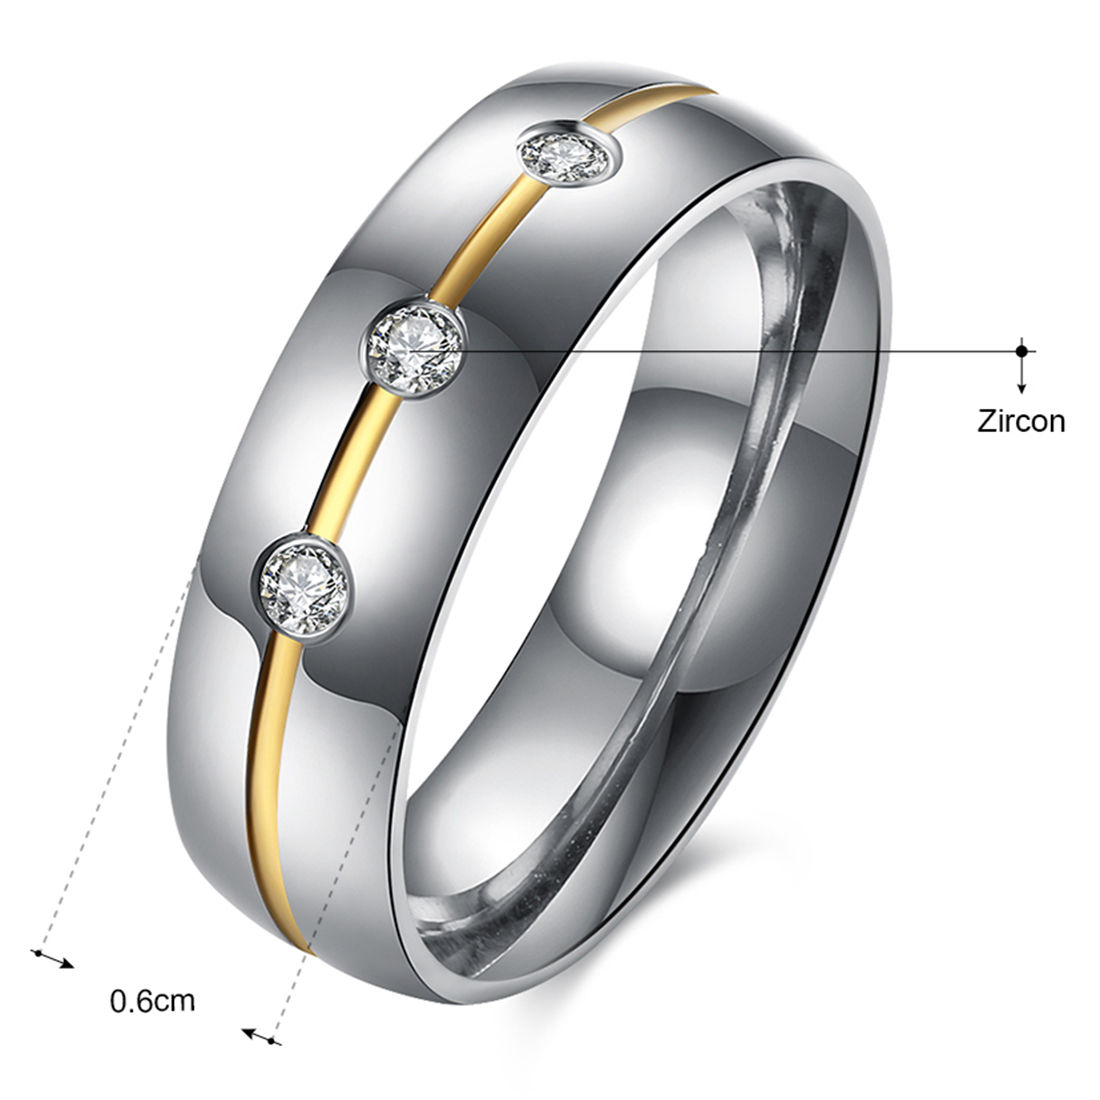 Pros and Cons of Buying a Stainless-Steel Wedding Band - Inox Jewelry India